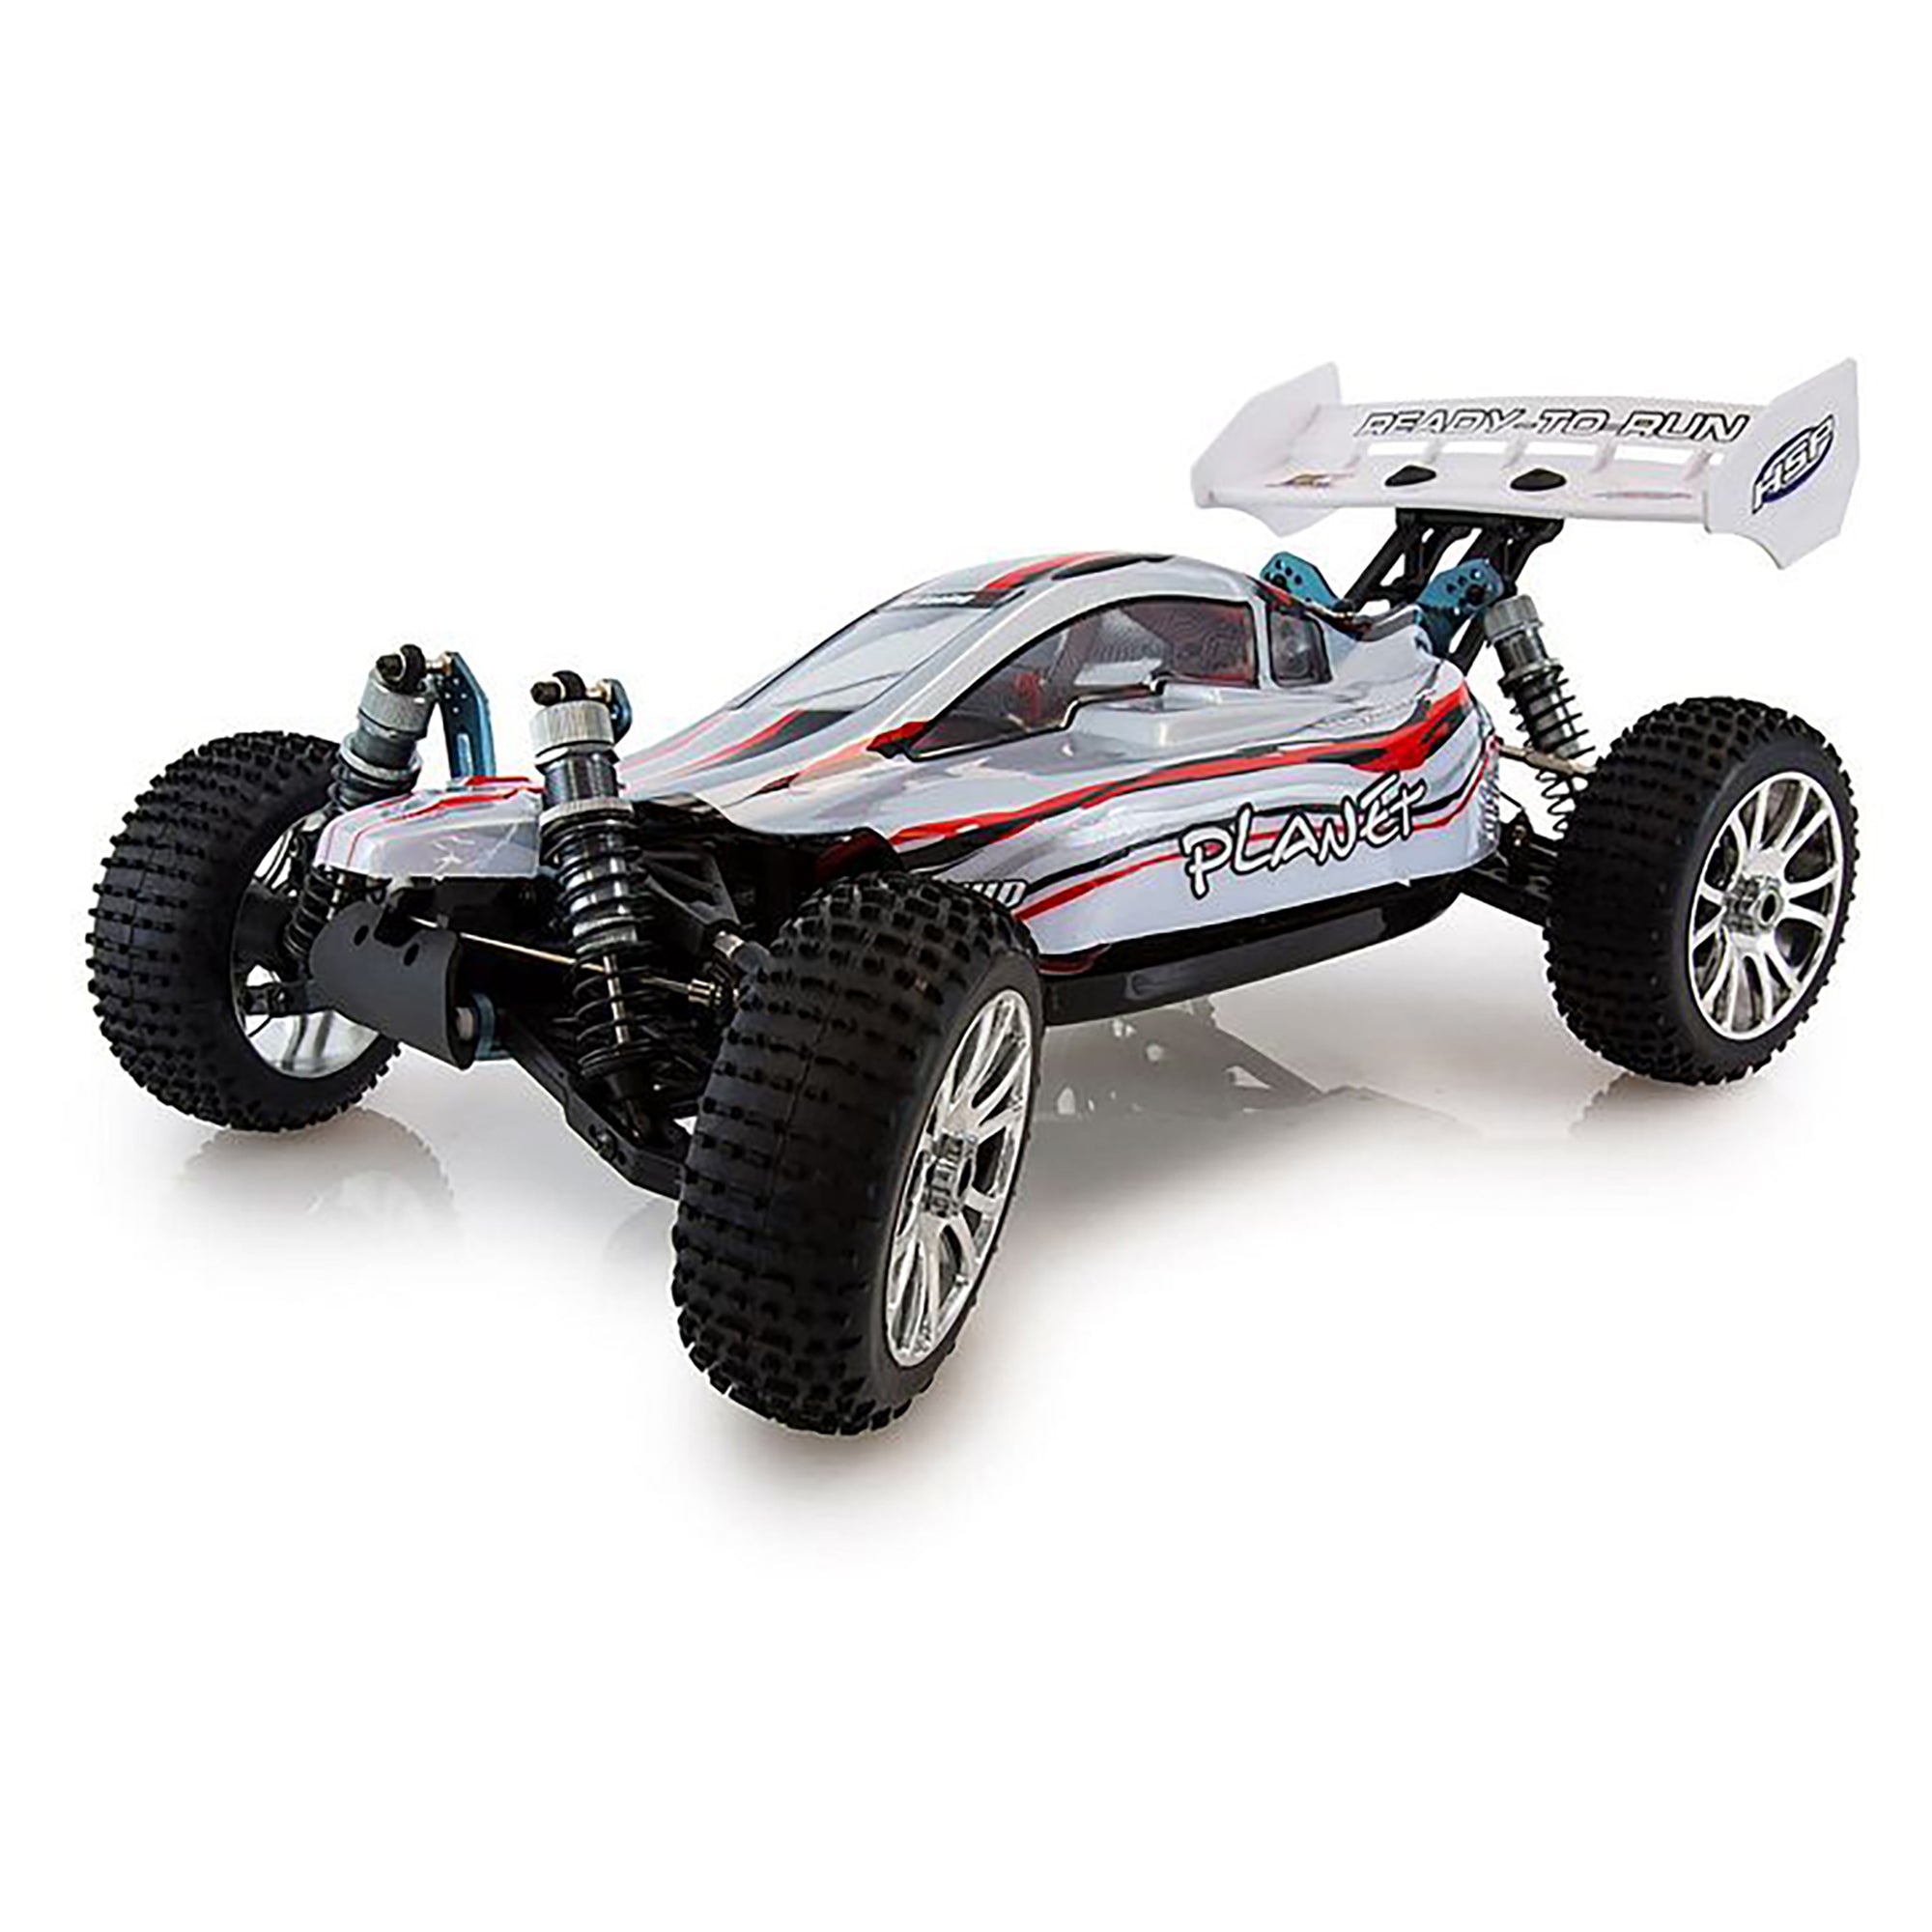 HSP Racing 94060TOP-86094 2.4Ghz Brushless Li-Po 4WD Off Road 1/8 Scale RC Buggy